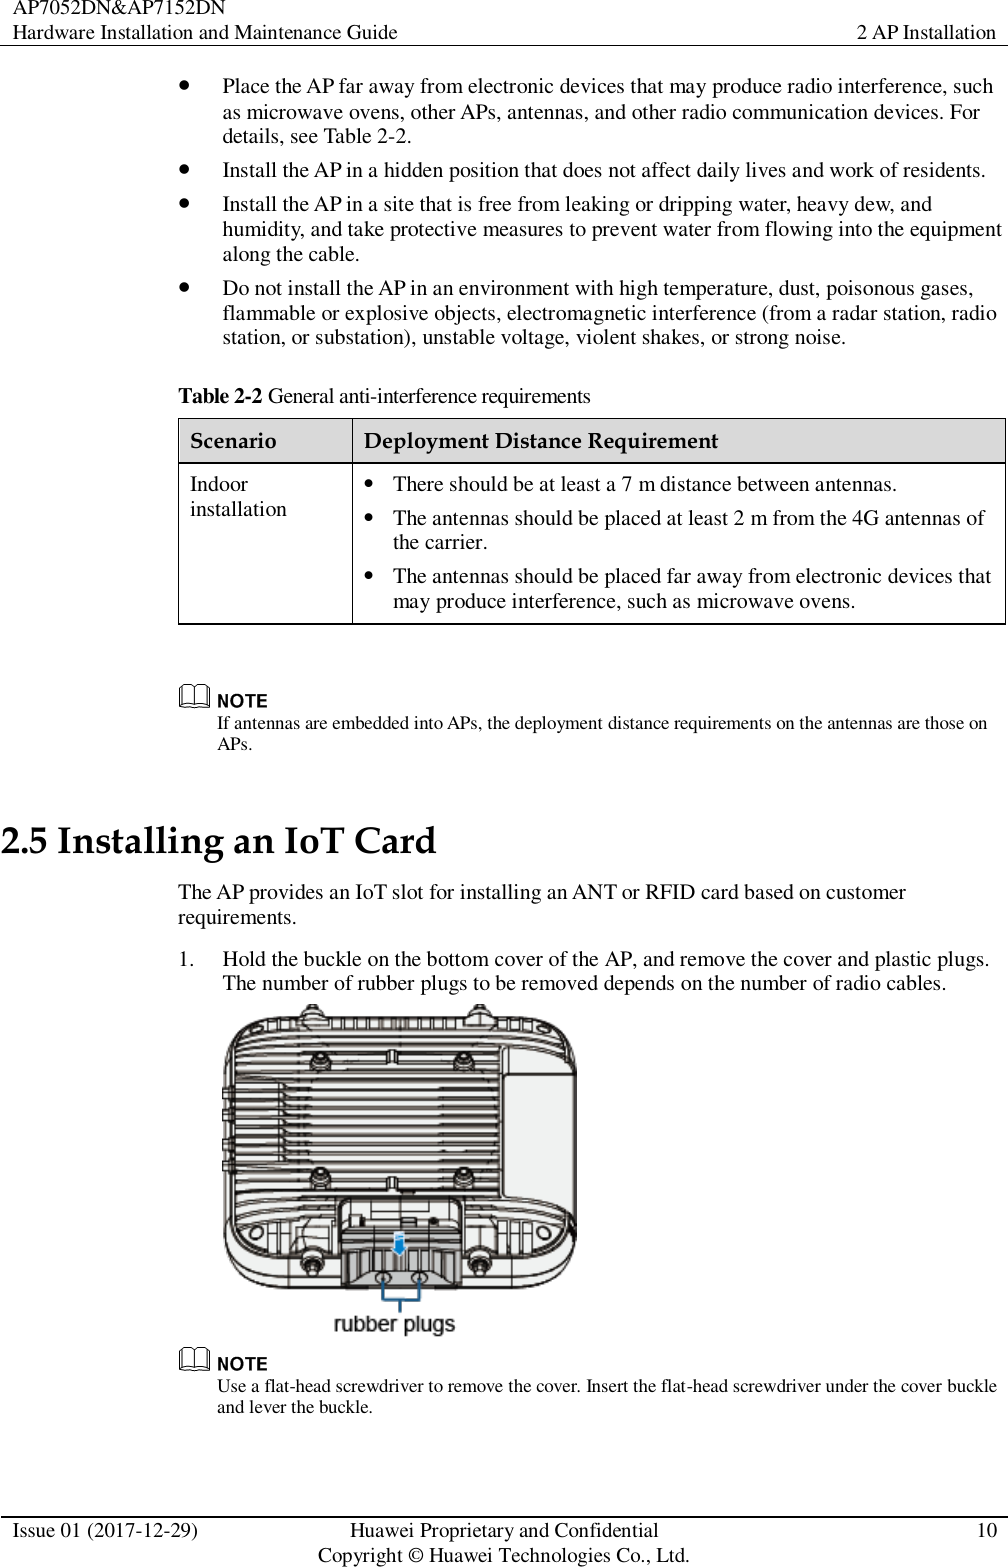 AP7052DN&amp;AP7152DN Hardware Installation and Maintenance Guide 2 AP Installation  Issue 01 (2017-12-29) Huawei Proprietary and Confidential                                     Copyright © Huawei Technologies Co., Ltd. 10   Place the AP far away from electronic devices that may produce radio interference, such as microwave ovens, other APs, antennas, and other radio communication devices. For details, see Table 2-2.  Install the AP in a hidden position that does not affect daily lives and work of residents.  Install the AP in a site that is free from leaking or dripping water, heavy dew, and humidity, and take protective measures to prevent water from flowing into the equipment along the cable.  Do not install the AP in an environment with high temperature, dust, poisonous gases, flammable or explosive objects, electromagnetic interference (from a radar station, radio station, or substation), unstable voltage, violent shakes, or strong noise. Table 2-2 General anti-interference requirements Scenario Deployment Distance Requirement Indoor installation  There should be at least a 7 m distance between antennas.  The antennas should be placed at least 2 m from the 4G antennas of the carrier.  The antennas should be placed far away from electronic devices that may produce interference, such as microwave ovens.   If antennas are embedded into APs, the deployment distance requirements on the antennas are those on APs. 2.5 Installing an IoT Card The AP provides an IoT slot for installing an ANT or RFID card based on customer requirements. 1. Hold the buckle on the bottom cover of the AP, and remove the cover and plastic plugs. The number of rubber plugs to be removed depends on the number of radio cables.   Use a flat-head screwdriver to remove the cover. Insert the flat-head screwdriver under the cover buckle and lever the buckle. 